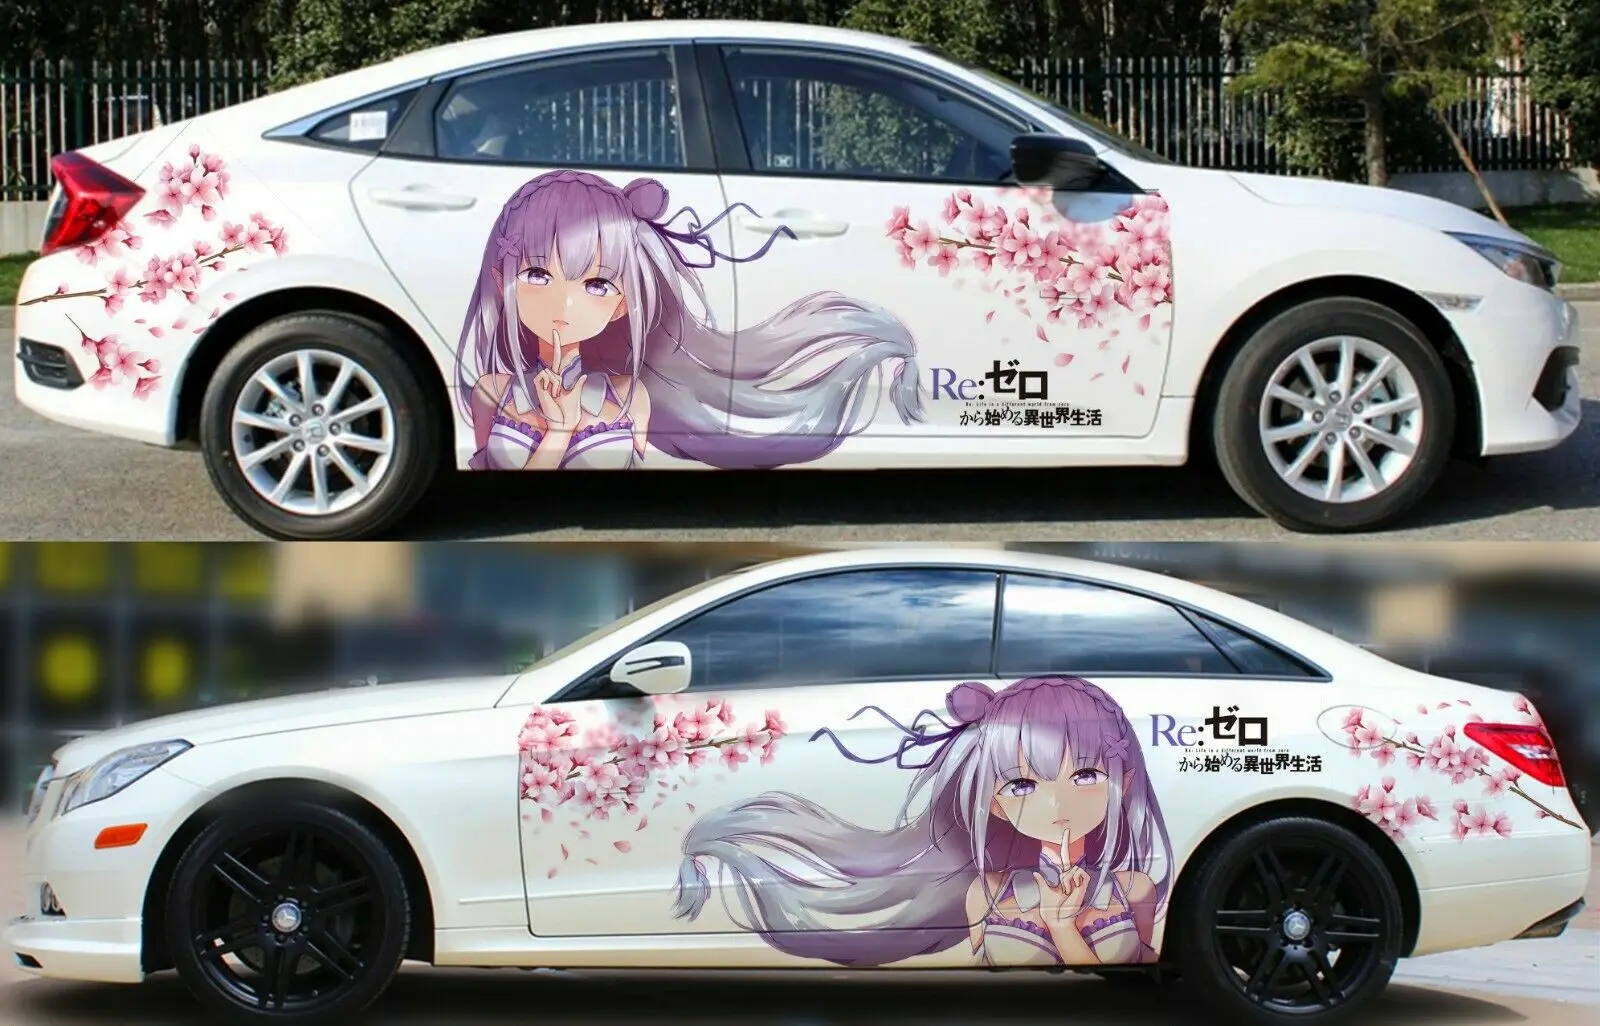 

Girl Anime Float Side Door Vinyl Sticker Decal Suitable for Any Car Anime Japanese Cartoon Character Vehicle Painting Sticker